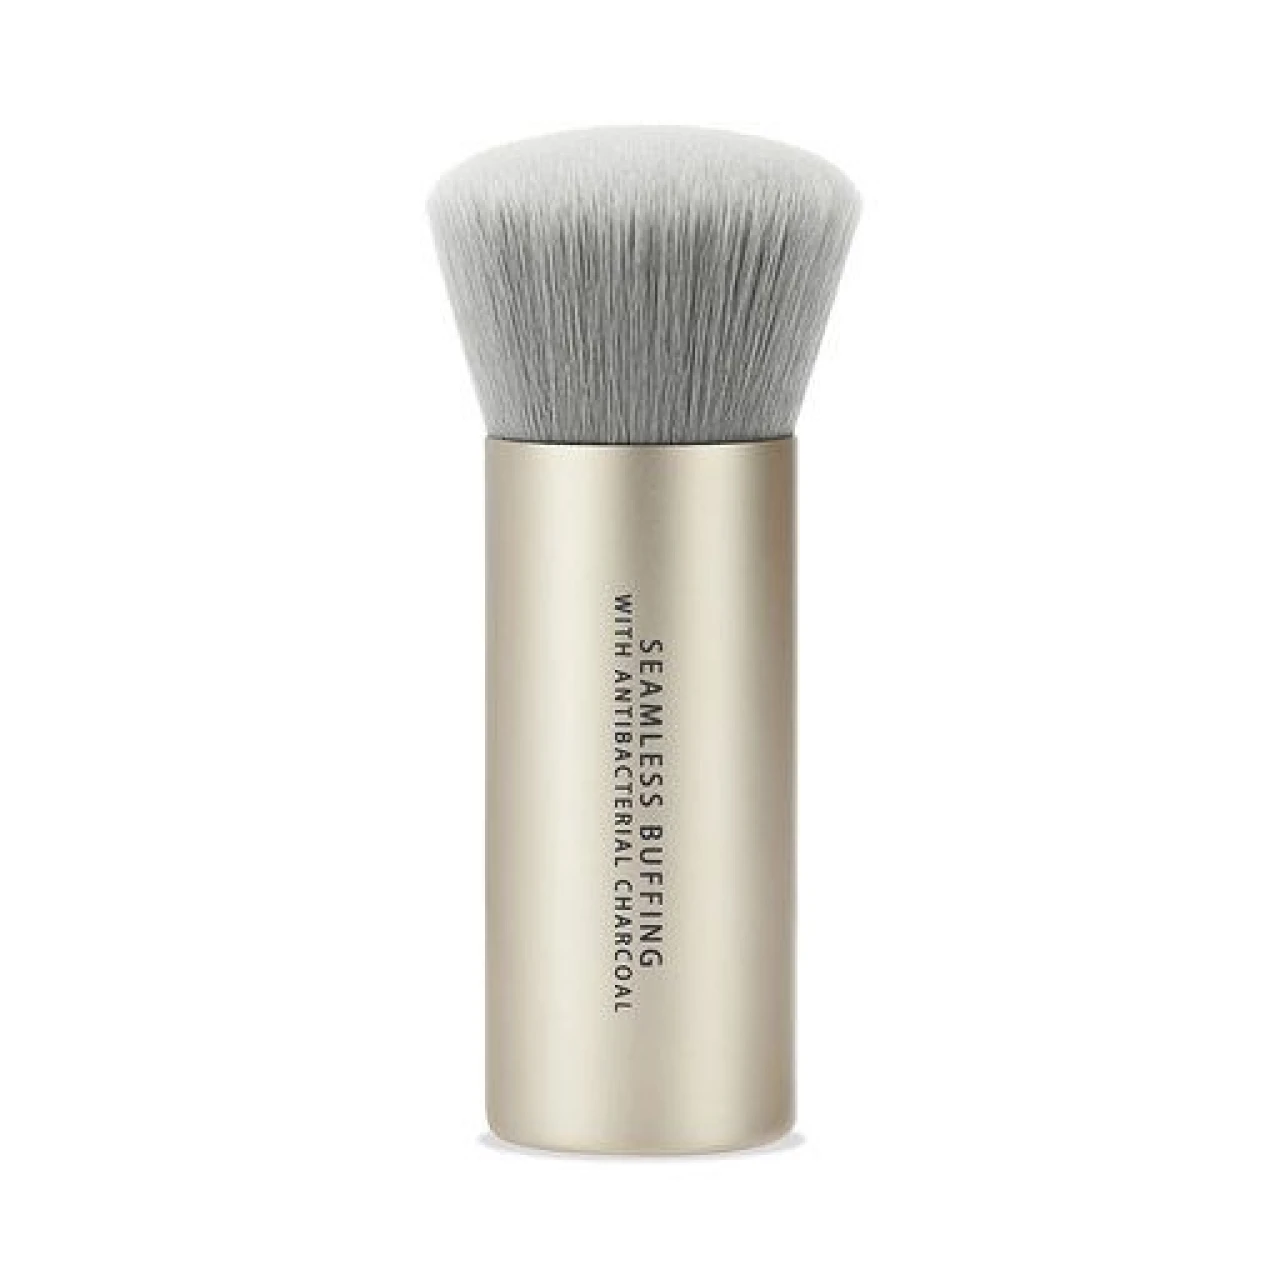 bareMinerals Seamless Buffing Brush with Antibacterial Charcoal